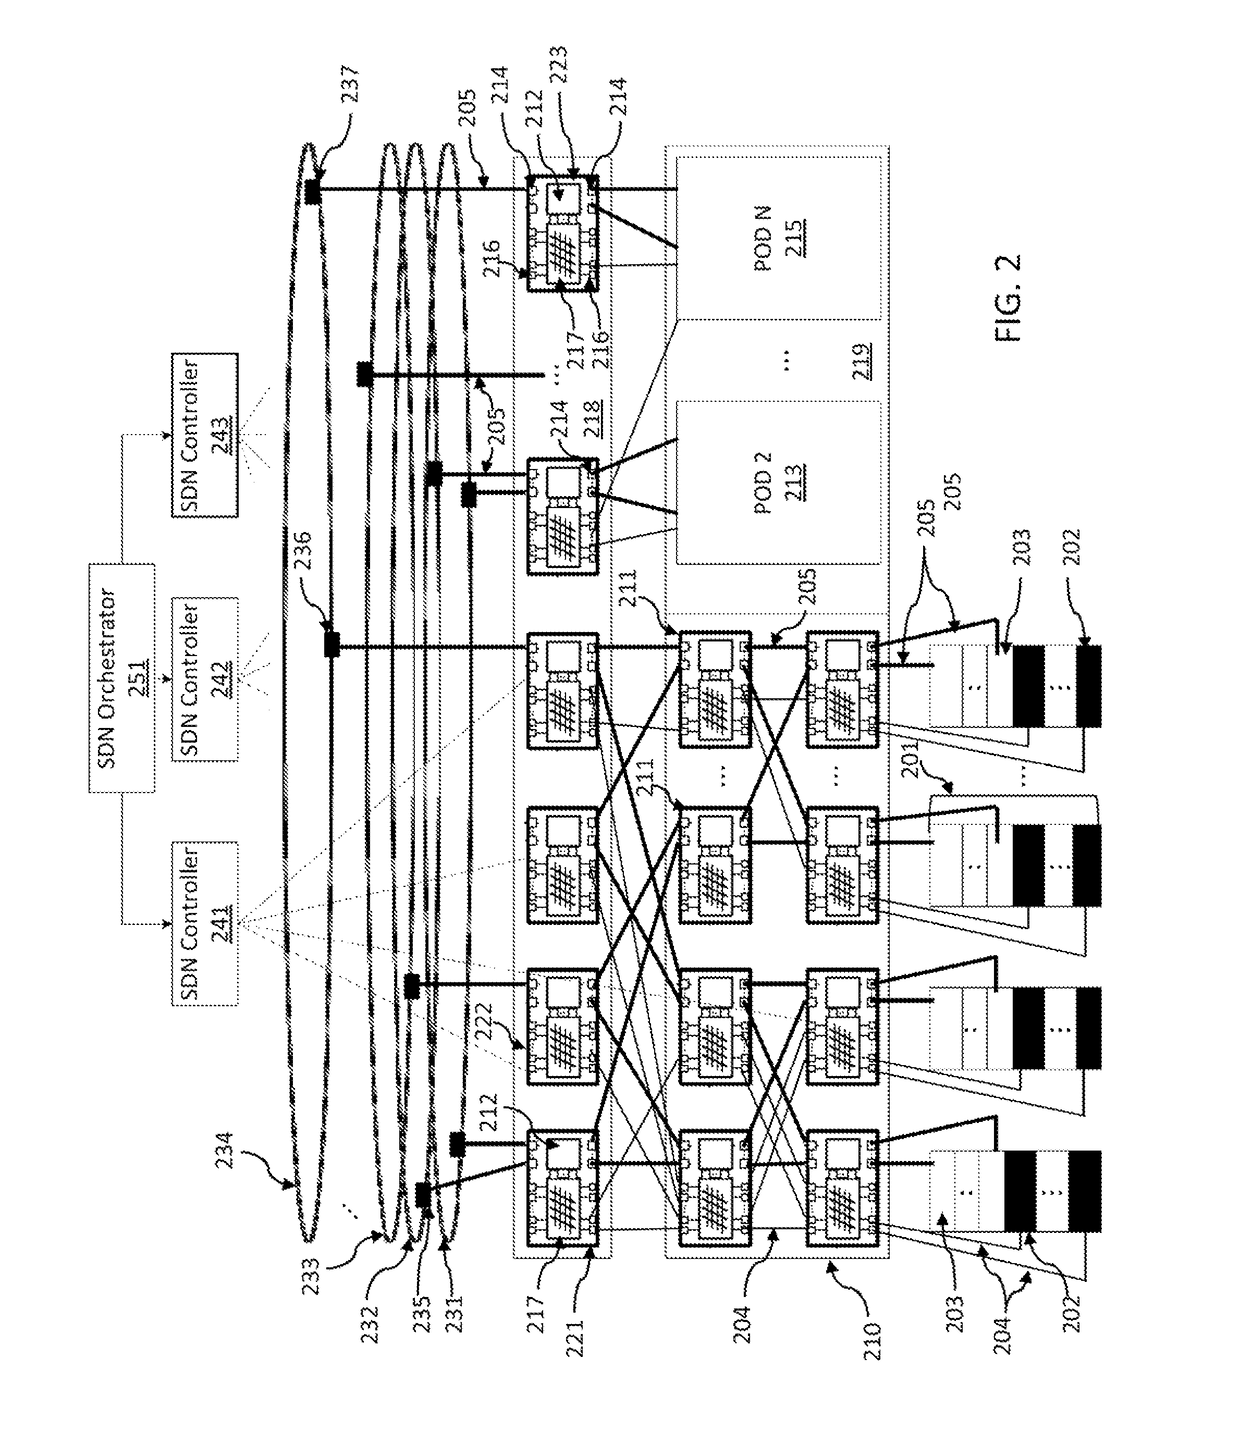 Scalable hybrid packet/circuit switching network architecture